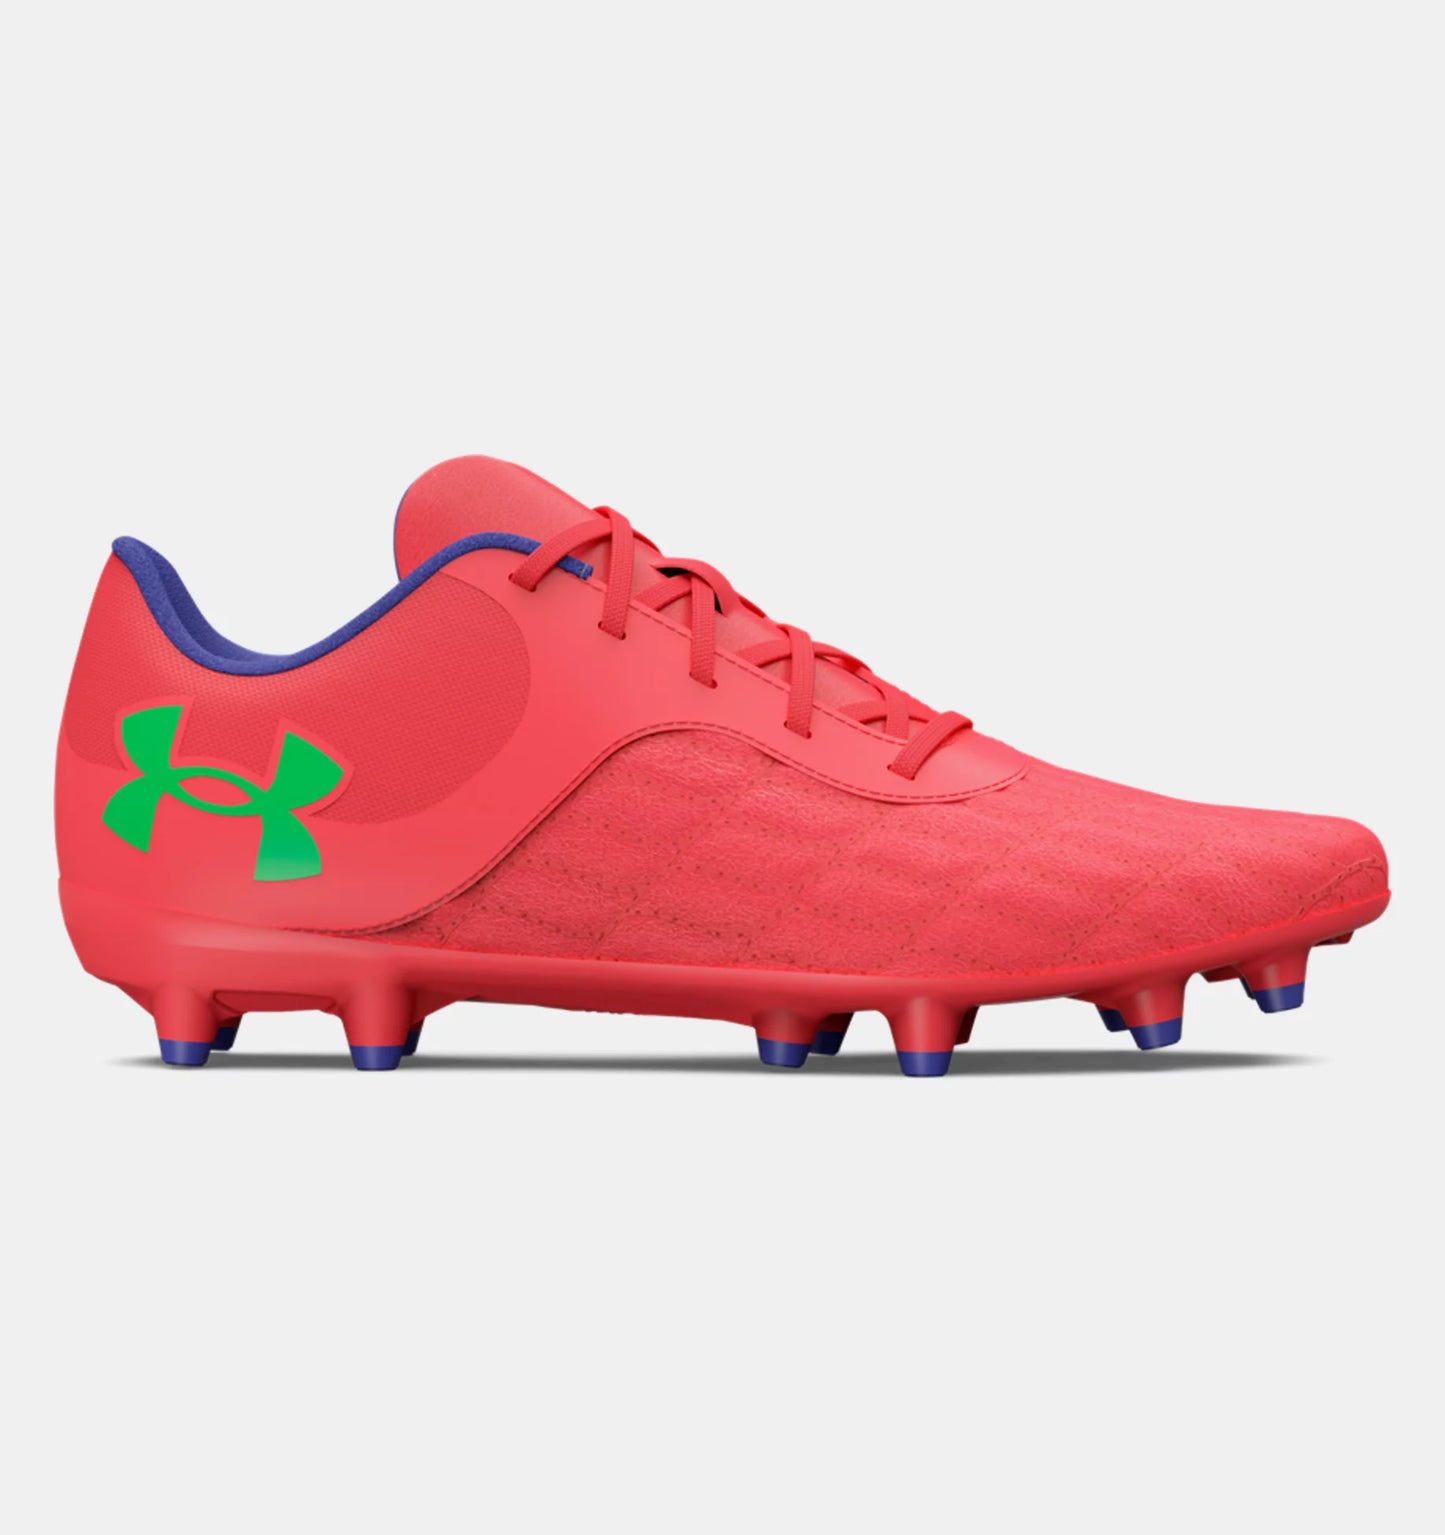 Under Armour Magnetico Select 3.0 Soccer Cleats - Coral